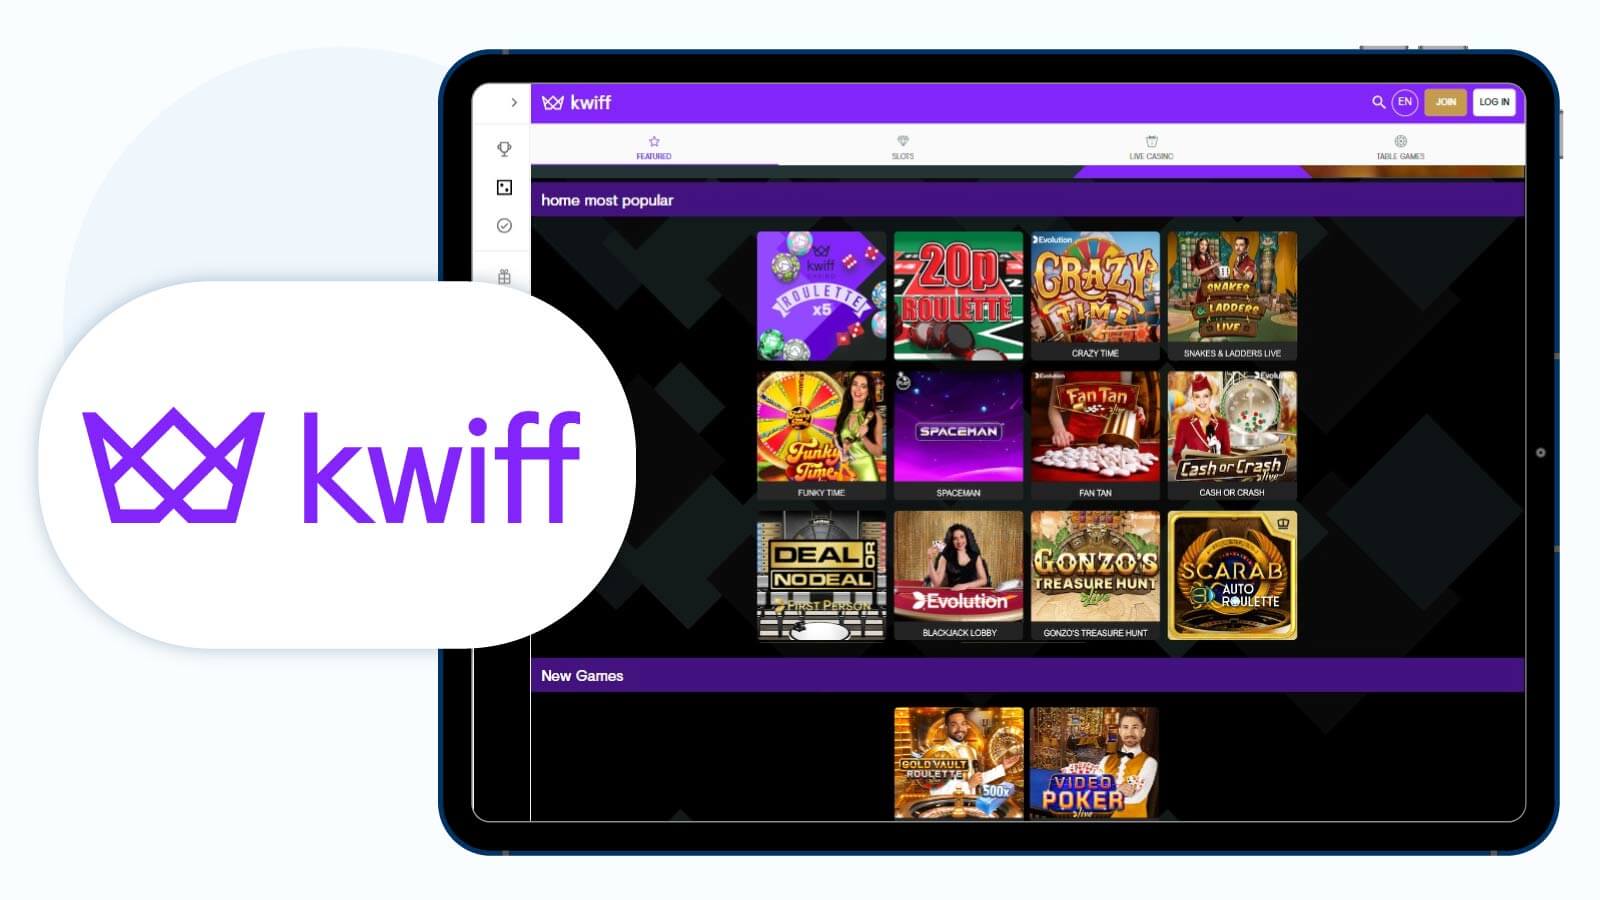 Kwiff - Best for Book of Dead Free Spins for £20 deposit